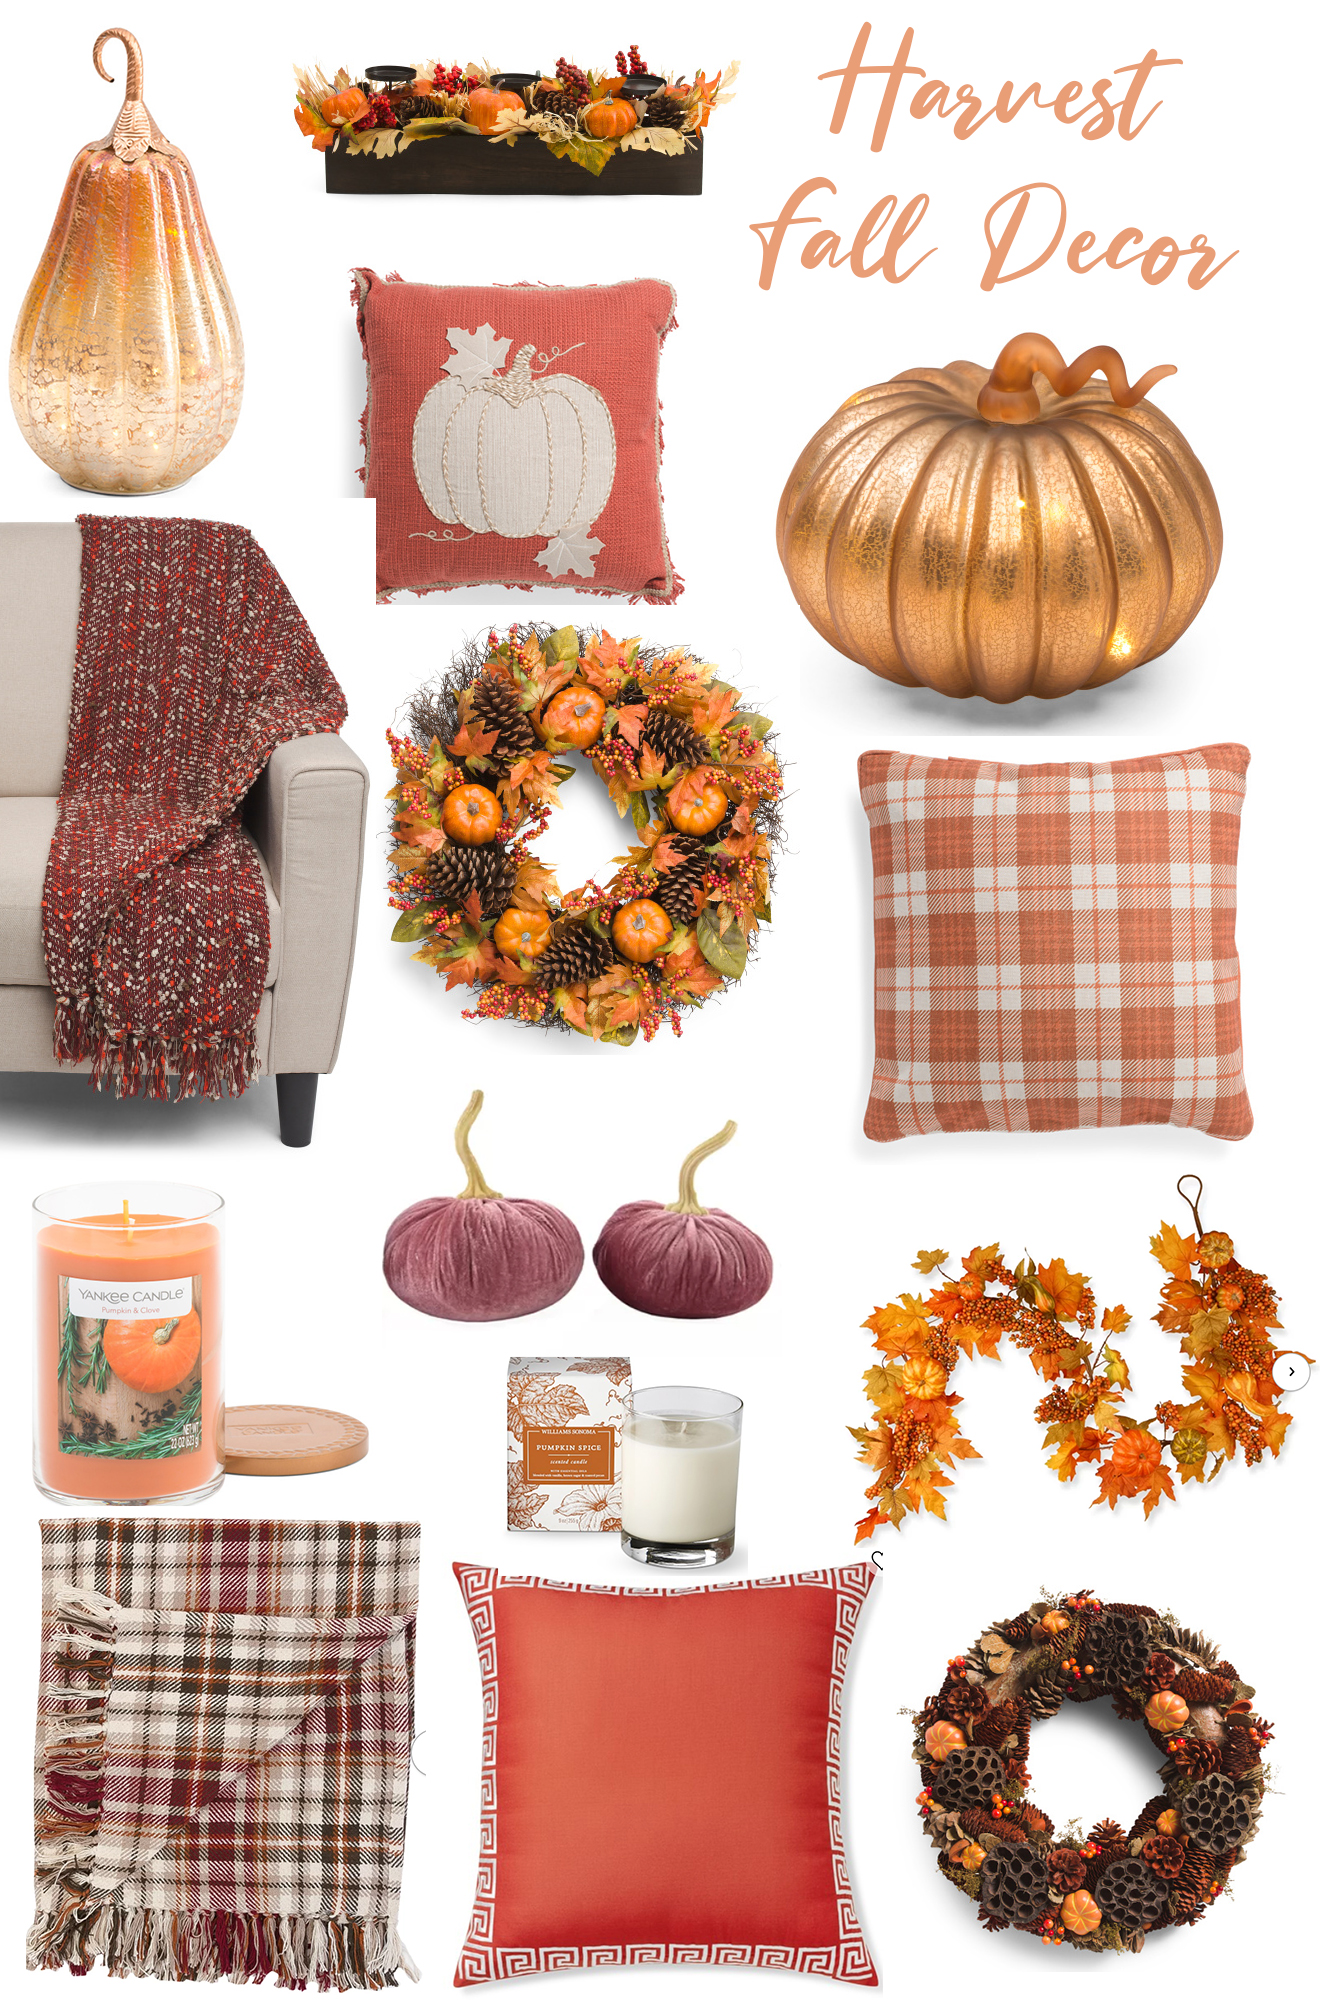 Colorful Fall Outdoor Inspiration and Decor - Pumpkins, harvest, oranges, reds, yellows and more this year. Everything a cozy outdoor space needs in autumn!